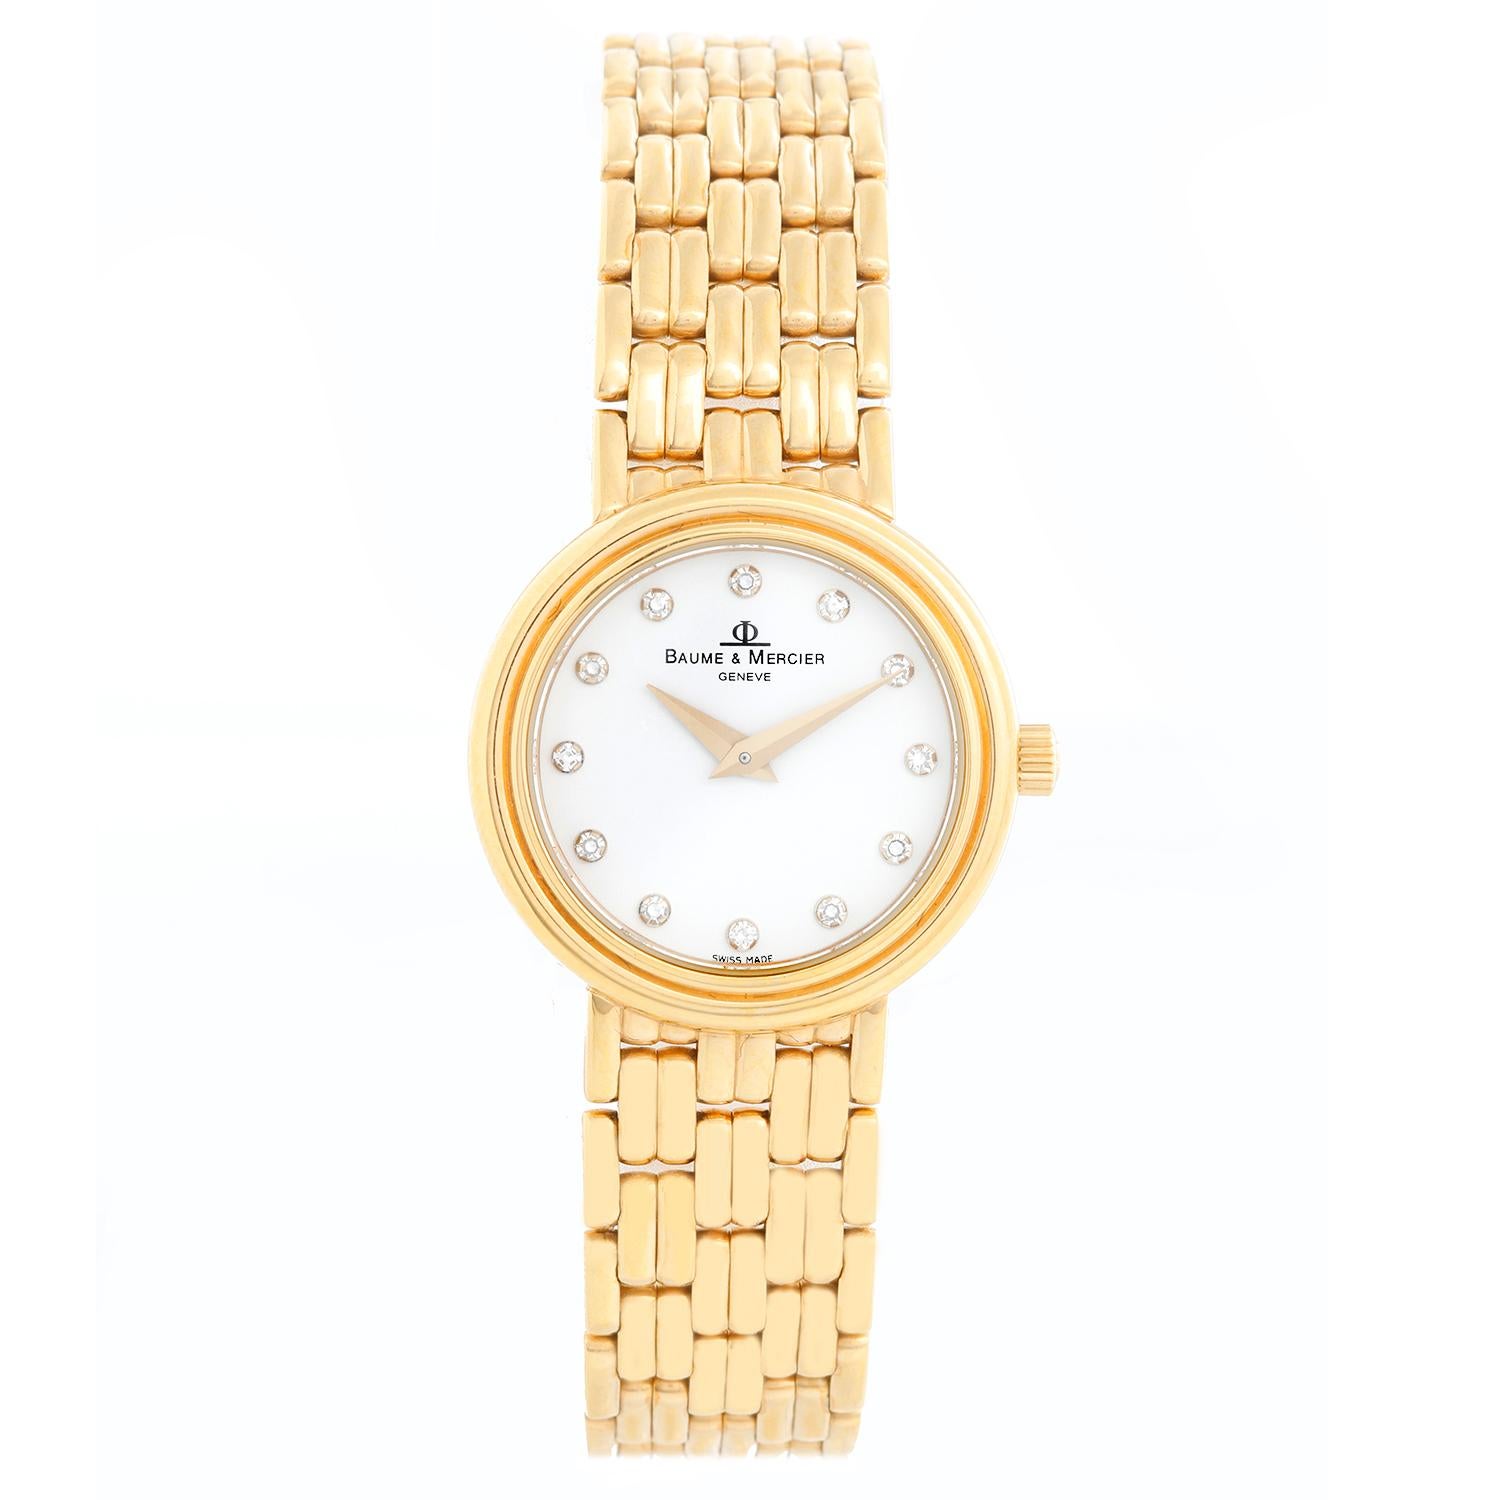 Baume & Mercier Ladies Classic Watch 65323 - Quartz. 14K  Yellow gold (23 mm). White dial with diamond dial. 14K Yellow gold bracelet; fits a 6 inch wrist bracelet . Pre-owned with  Baume box and book.